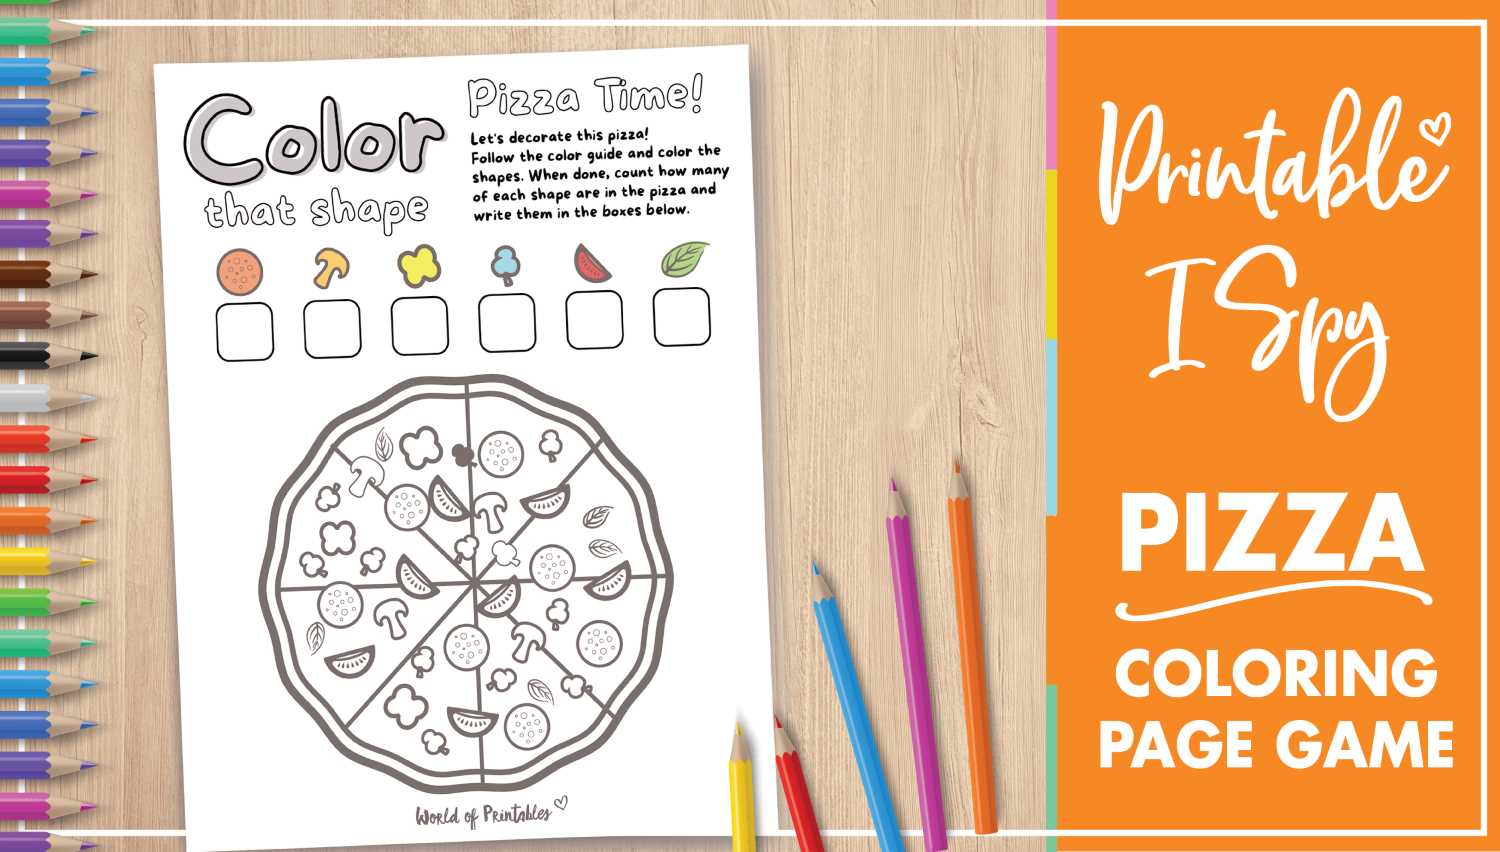 Free printable i spy pizza coloring page game